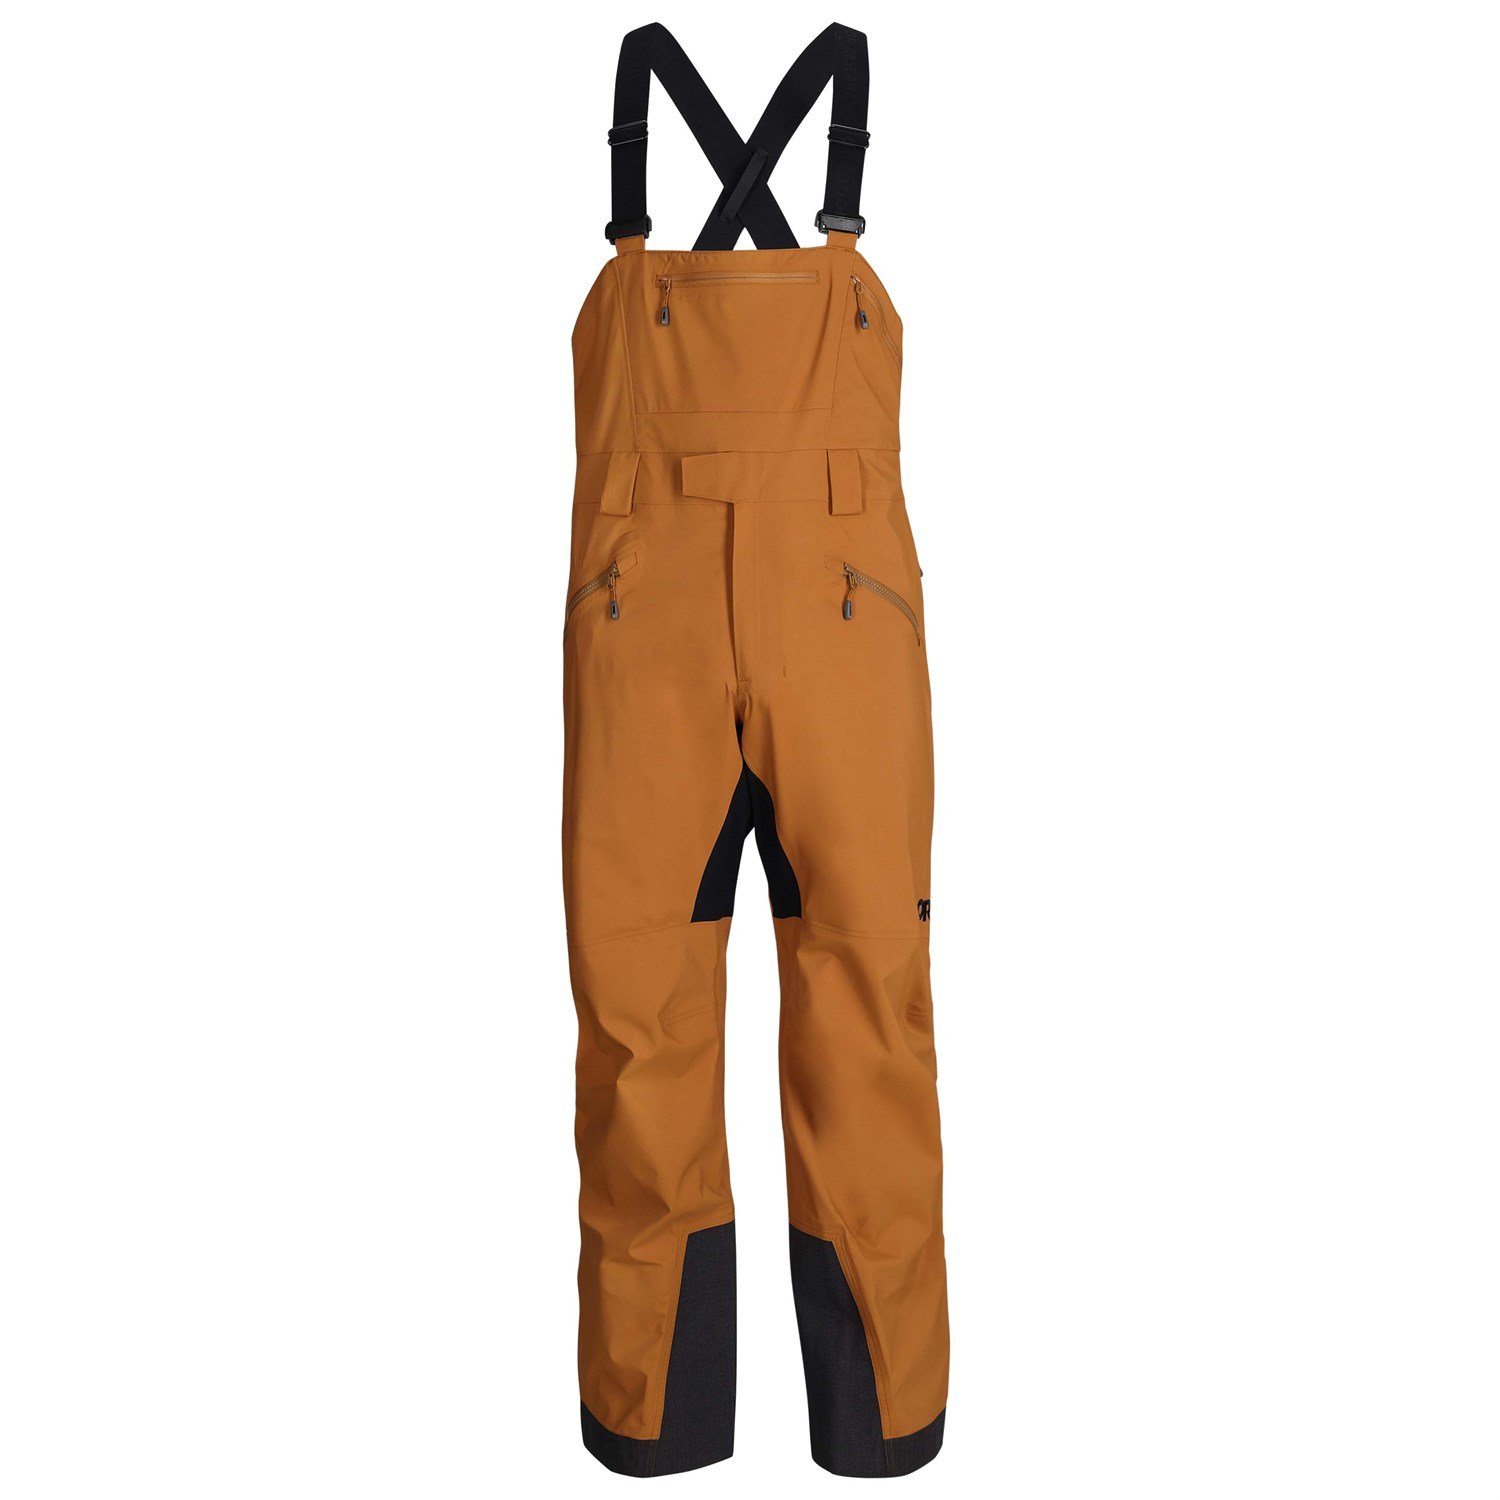 Traditional Long Johns With Yoke/button Front and Brace Tapes